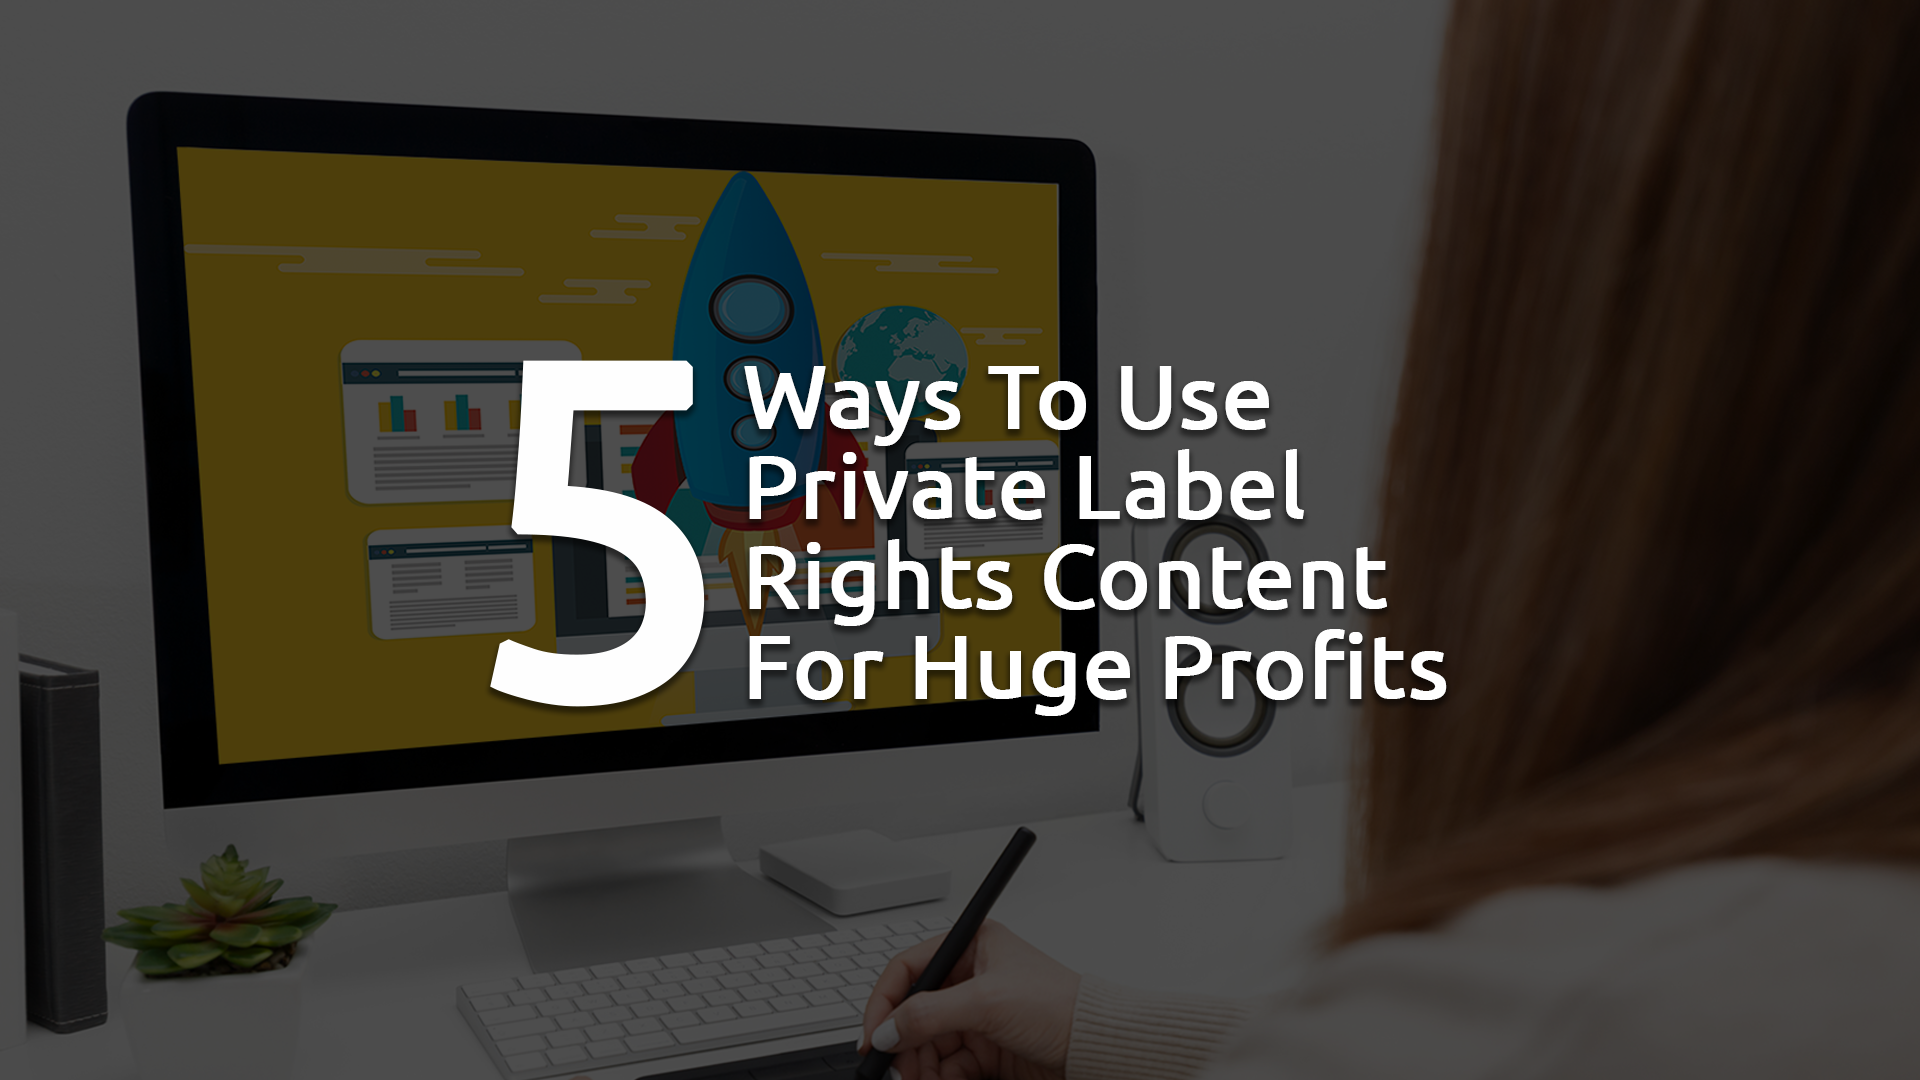 Free Video - 5 Ways To Use PLR Content For Huge Profits